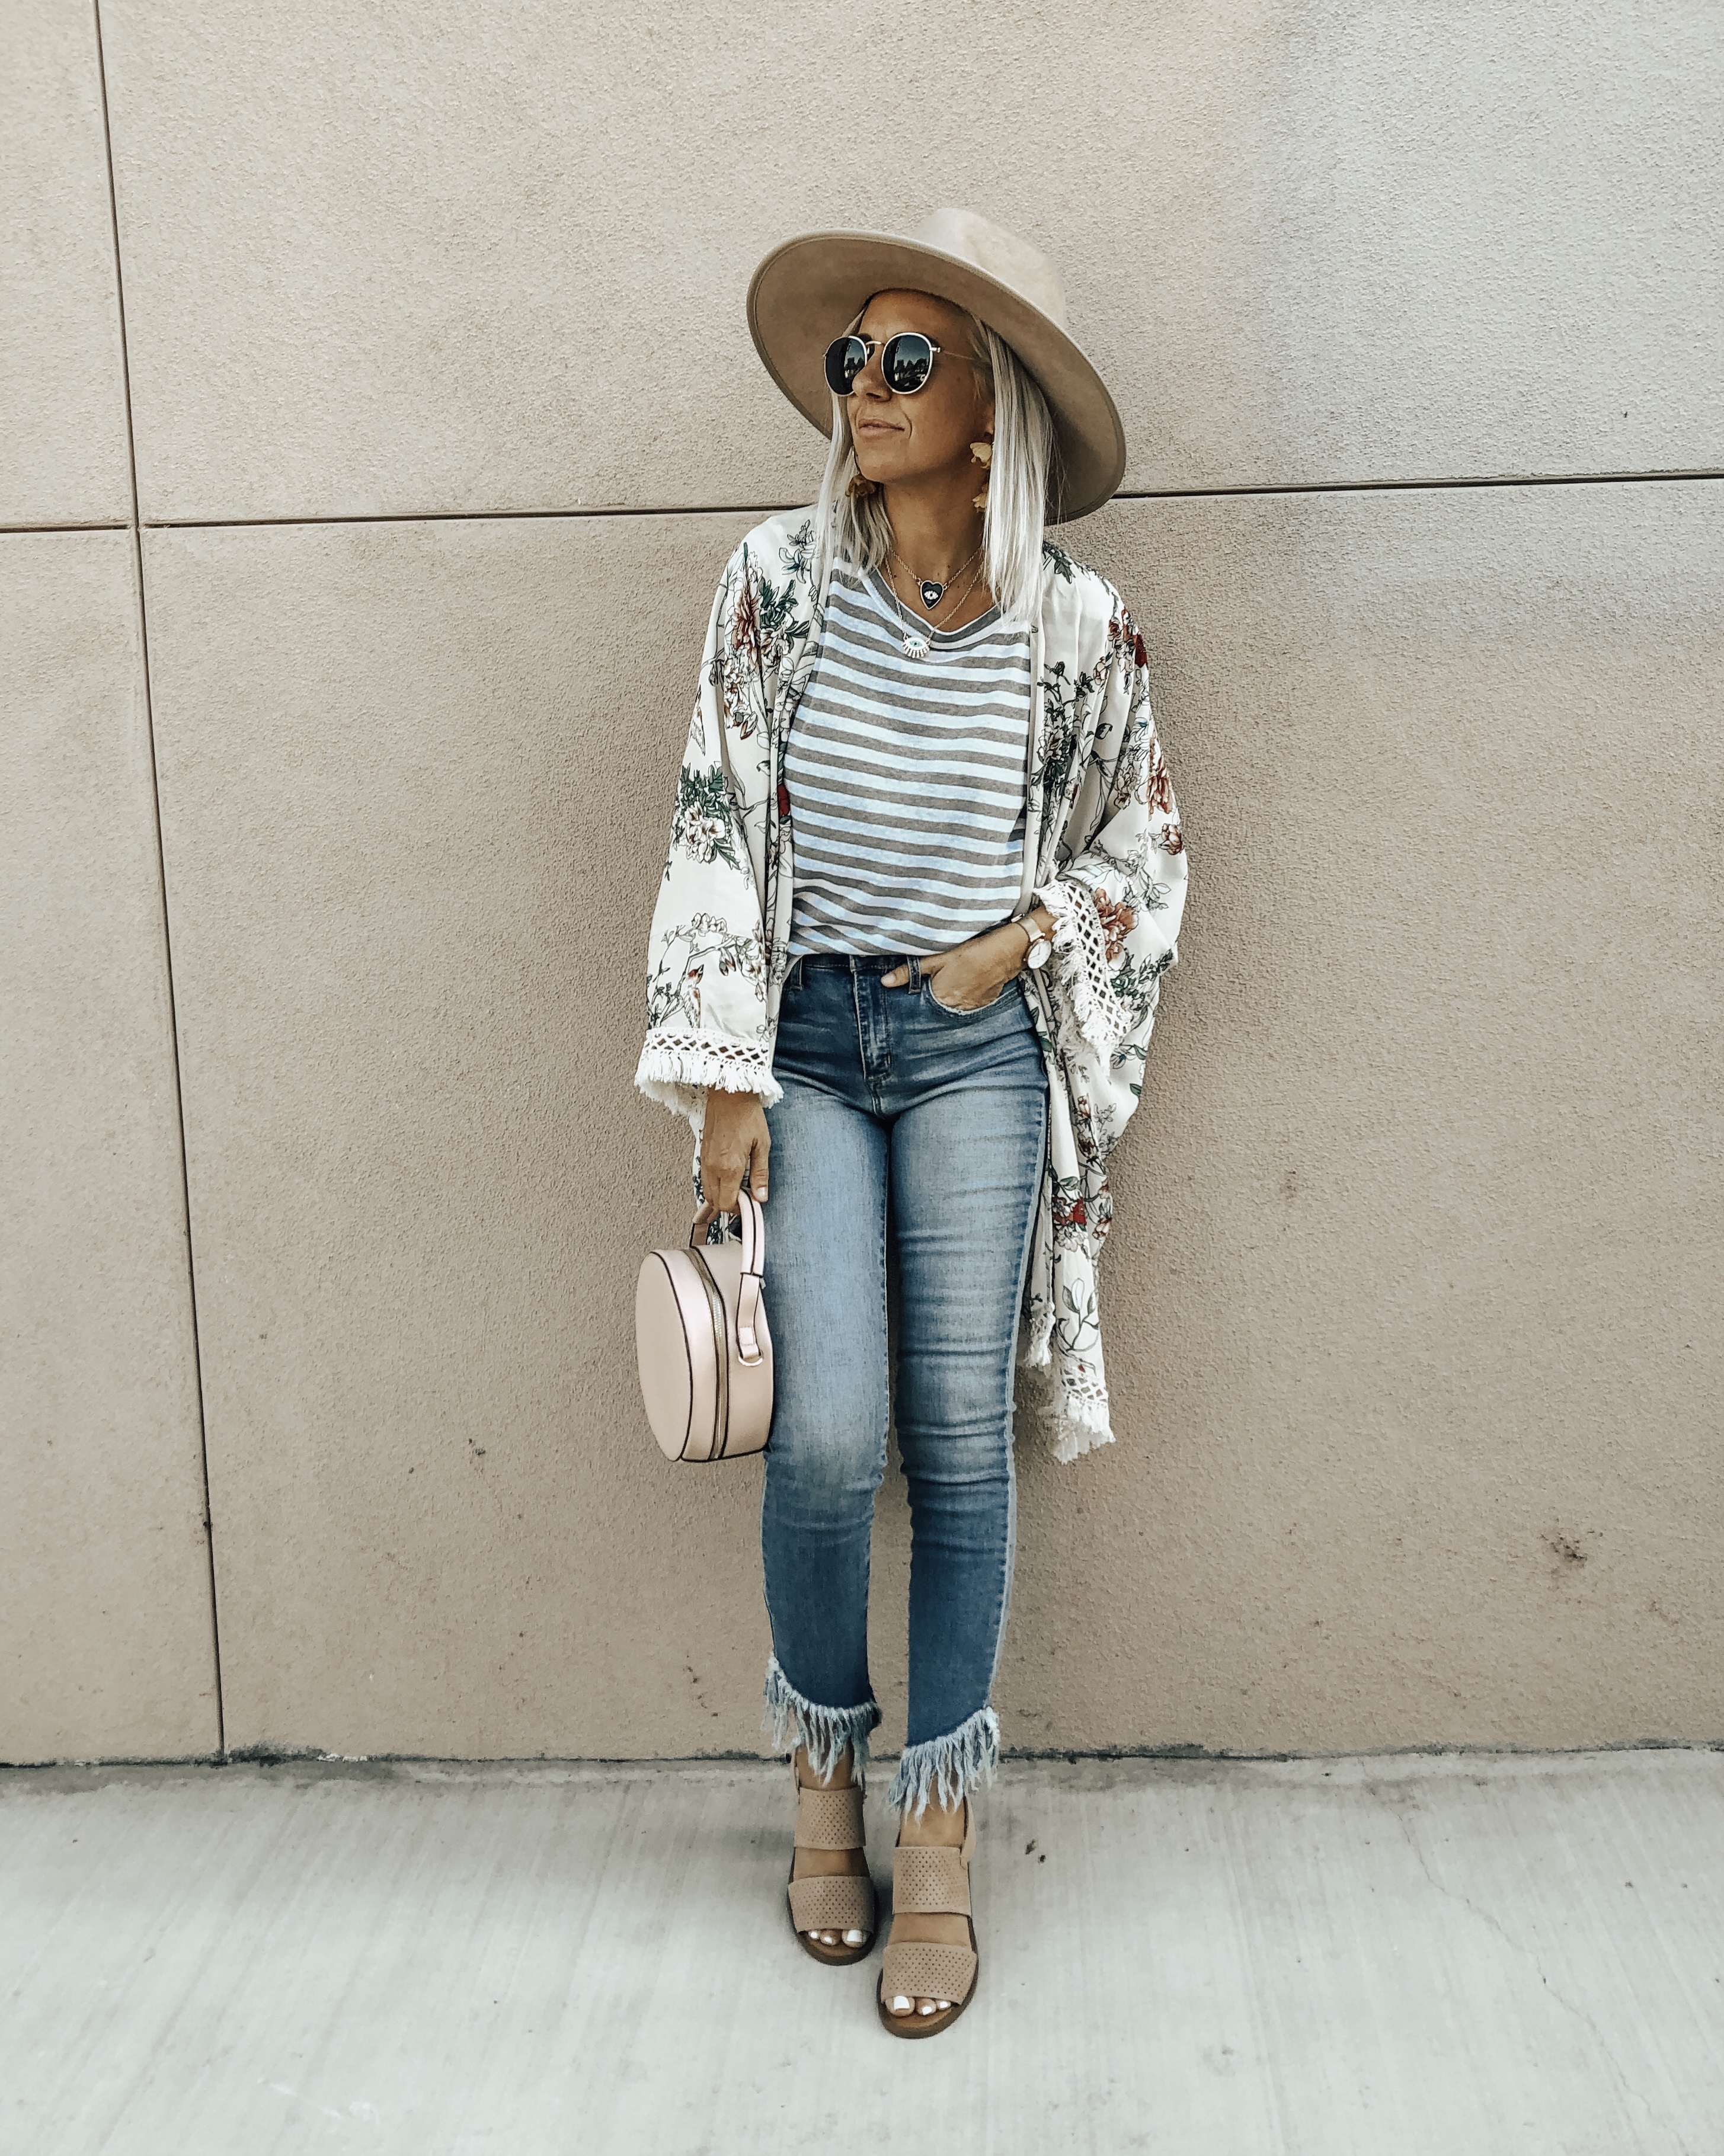 THE BEST DENIM FOR FALL FROM WALMART- Jaclyn De Leon Style + Are you shopping for new denim for back to school. I've rounded up my favorite + most affordable denim from Walmart.